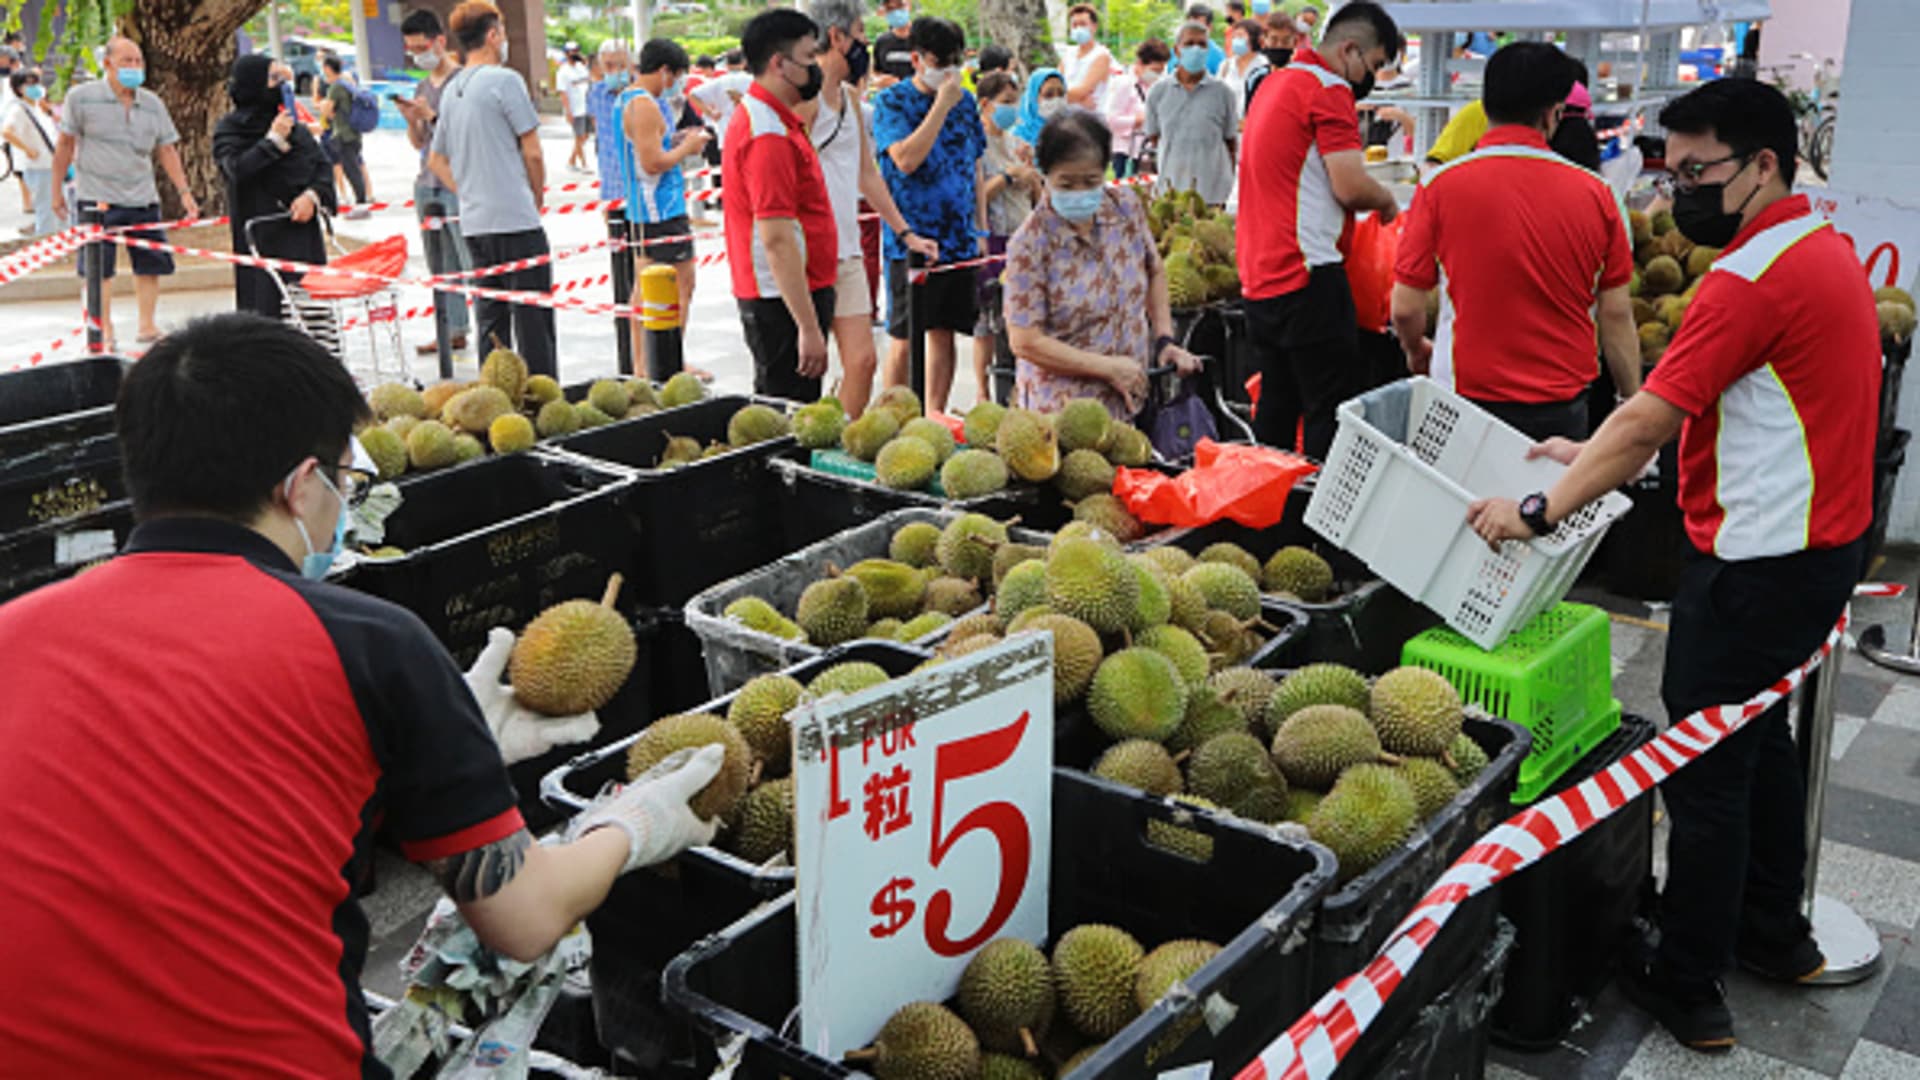 People wait in line to buy durians in Singapore on June 24, 2021.